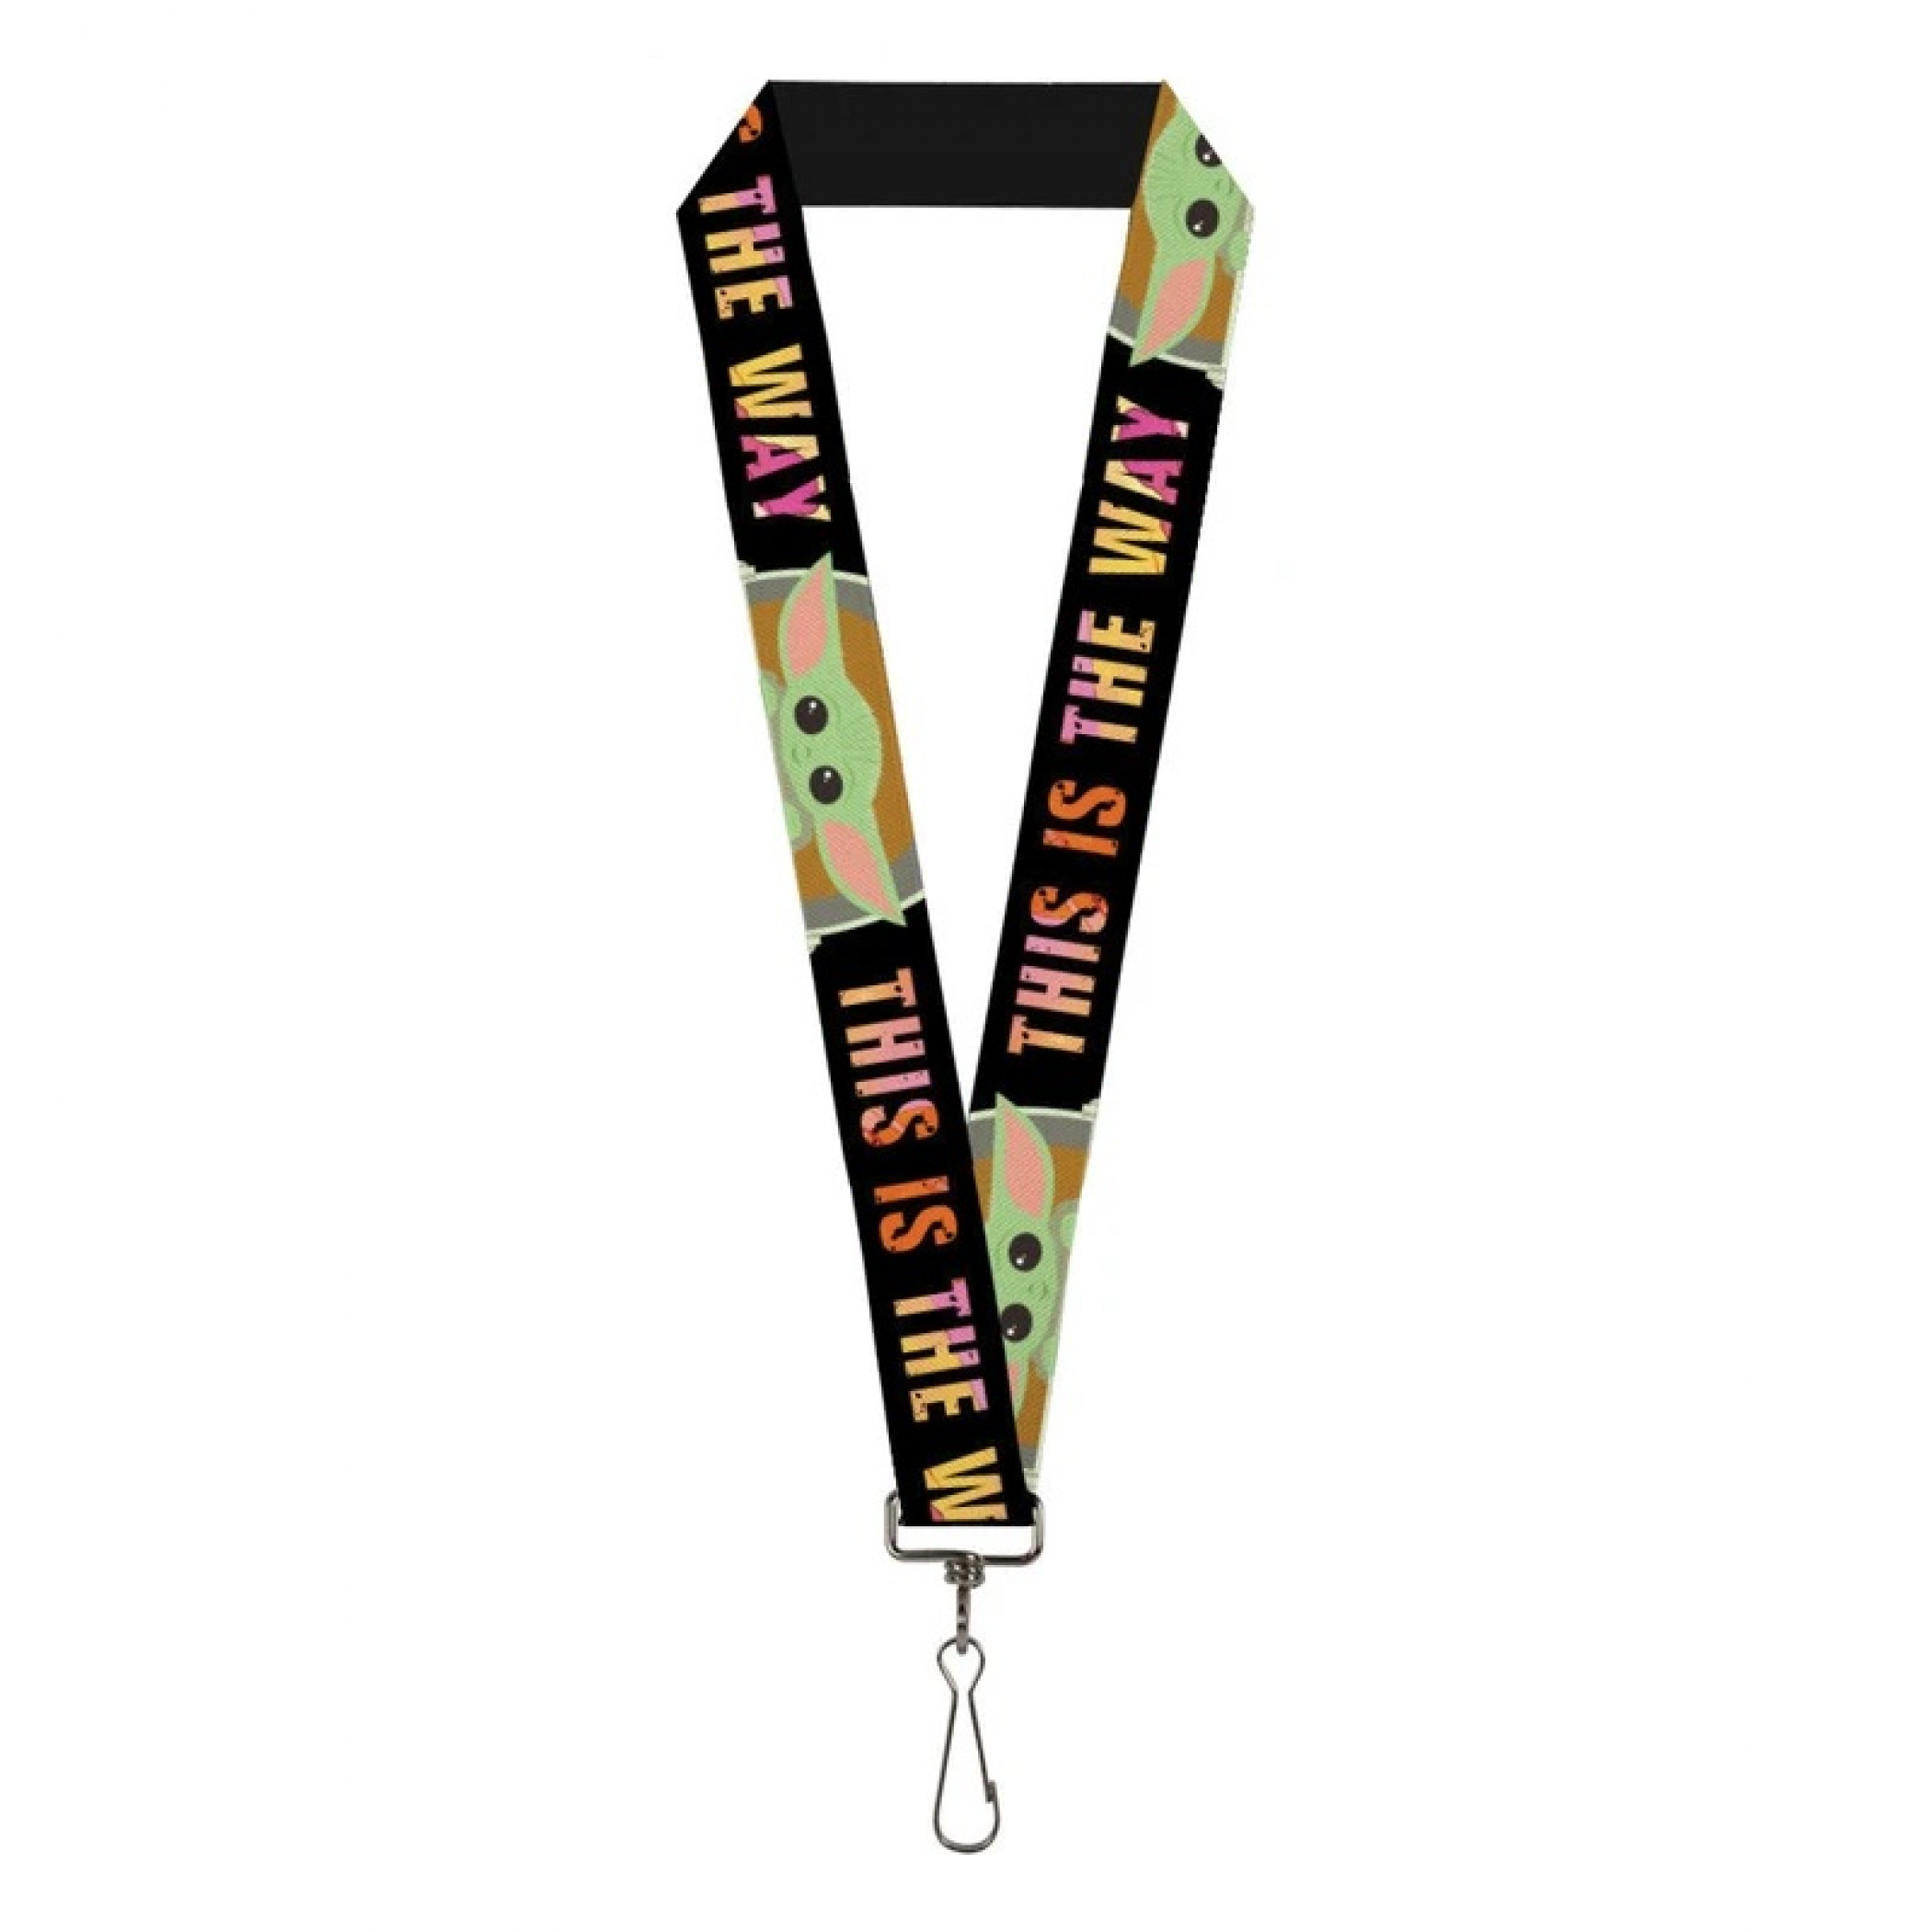 Star Wars The Mandalorian This Is The Way "The Child" Lanyard